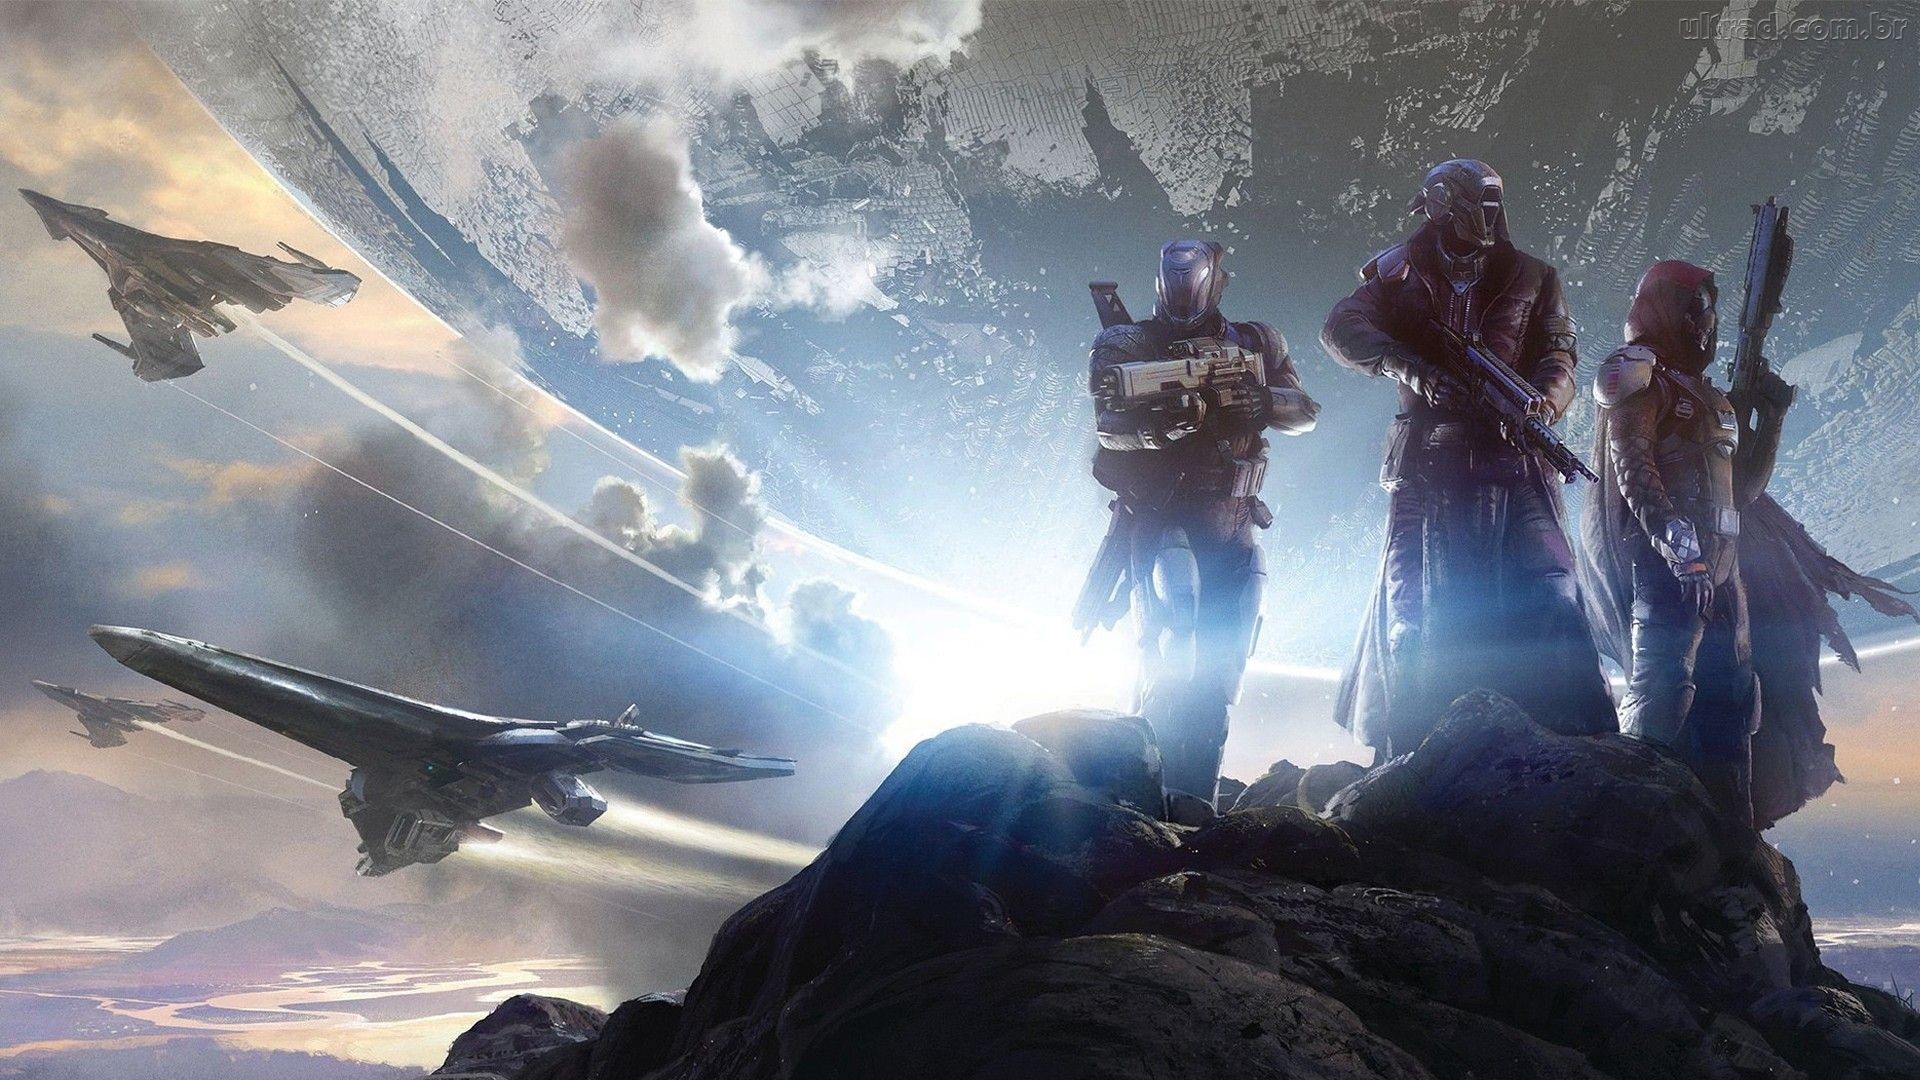 1920x1080 70 Awesome Destiny Wallpapers for your Computer, Tablet, or Phone